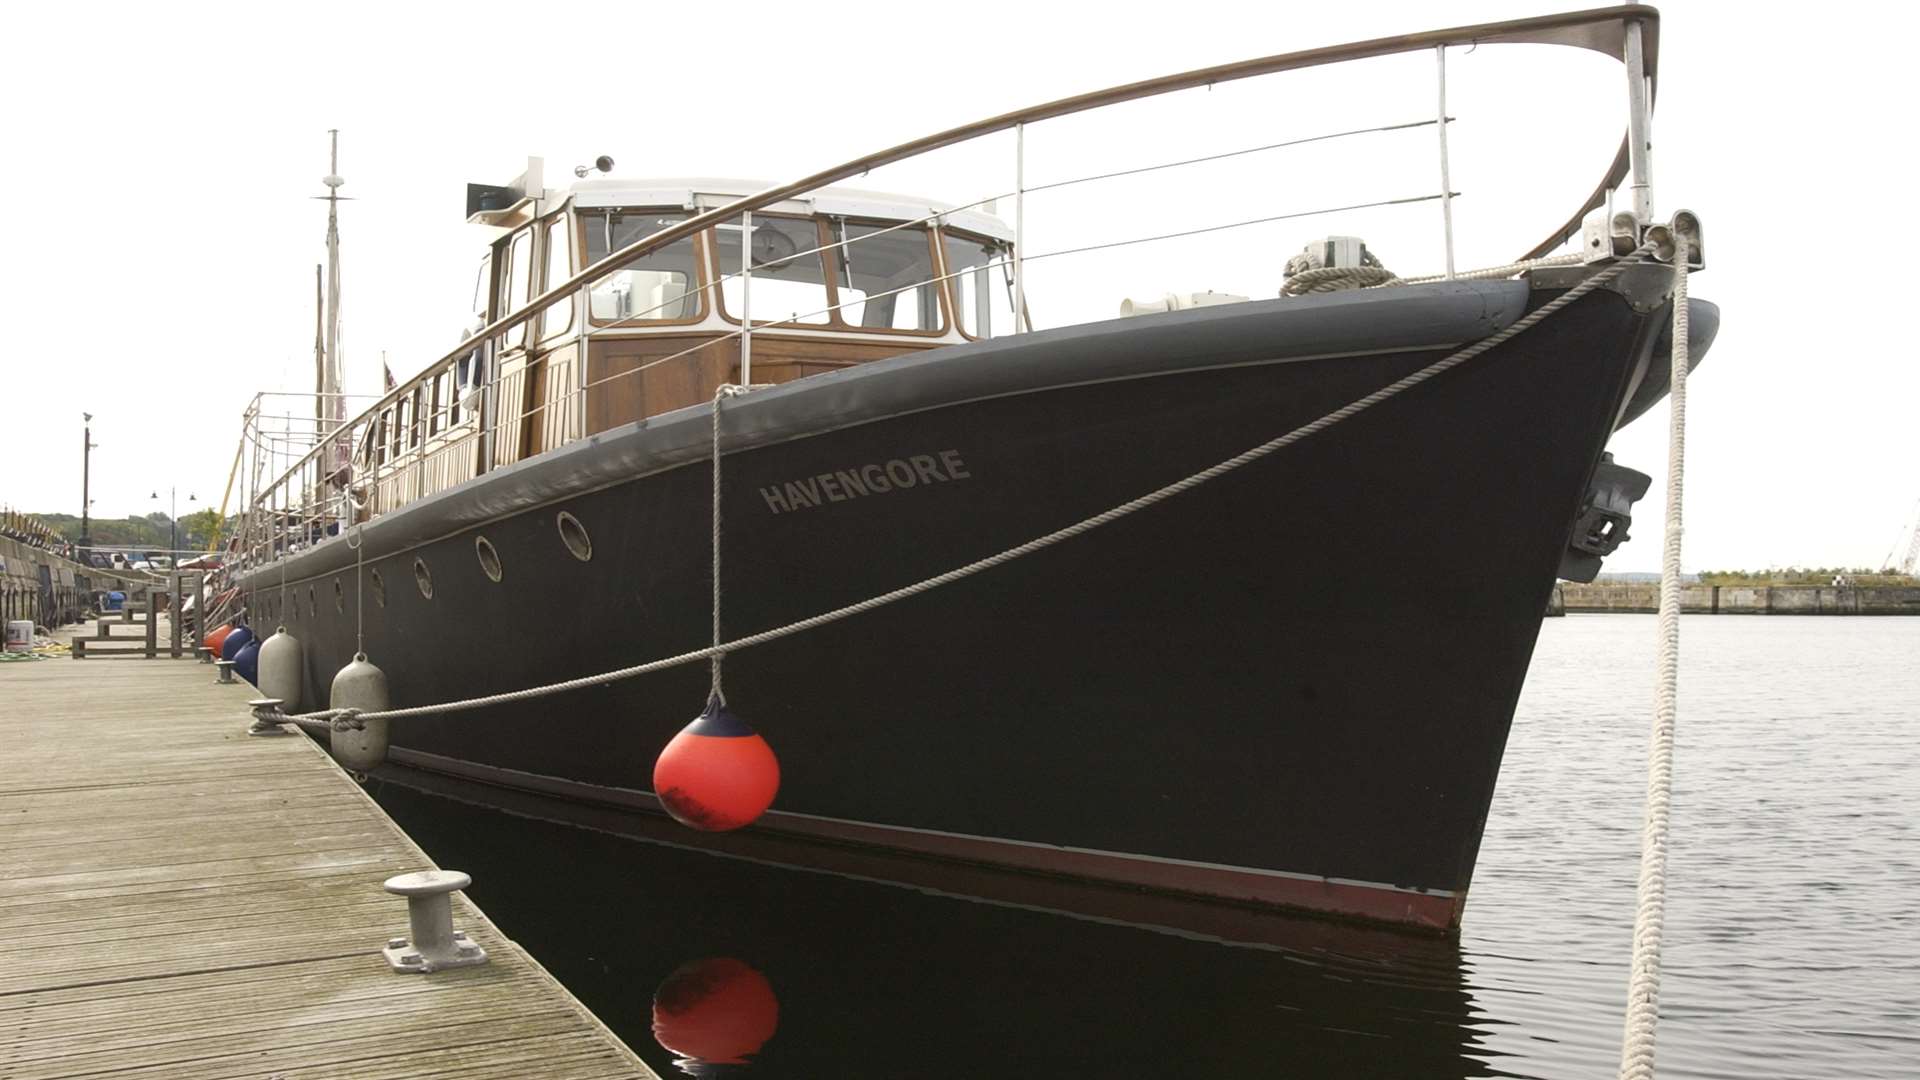 The Havengore at Chatham Maritime in 2002